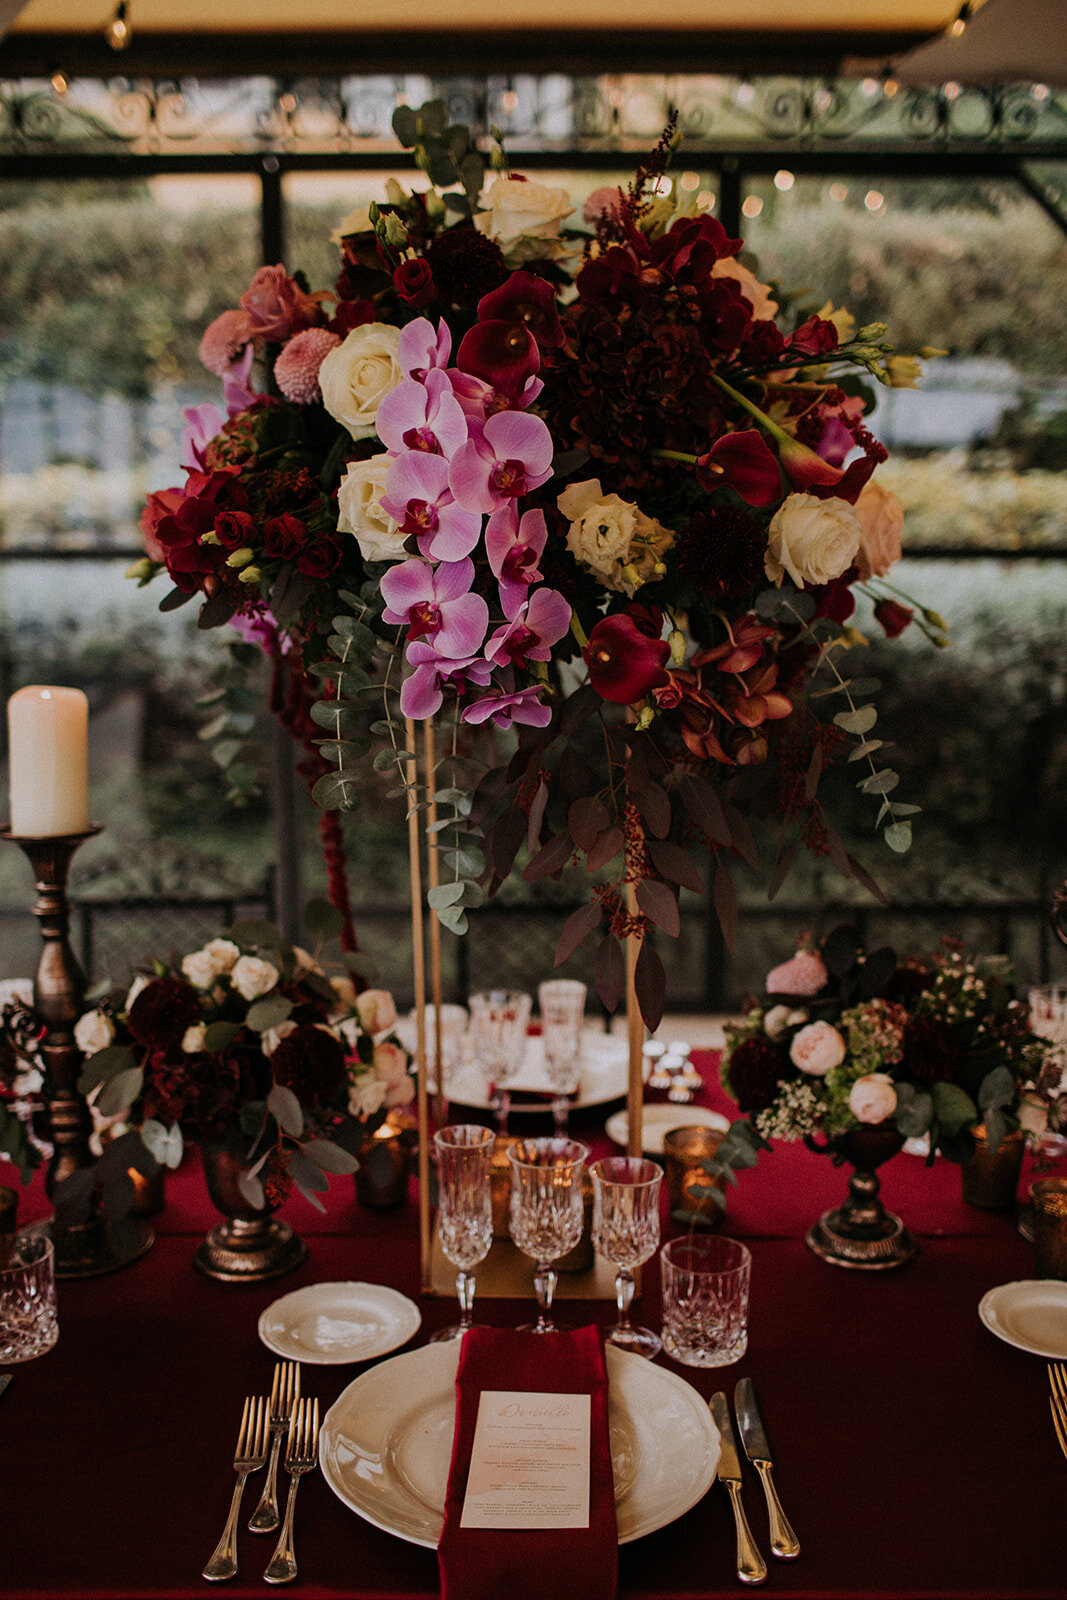 Tall centrepieces with orchids